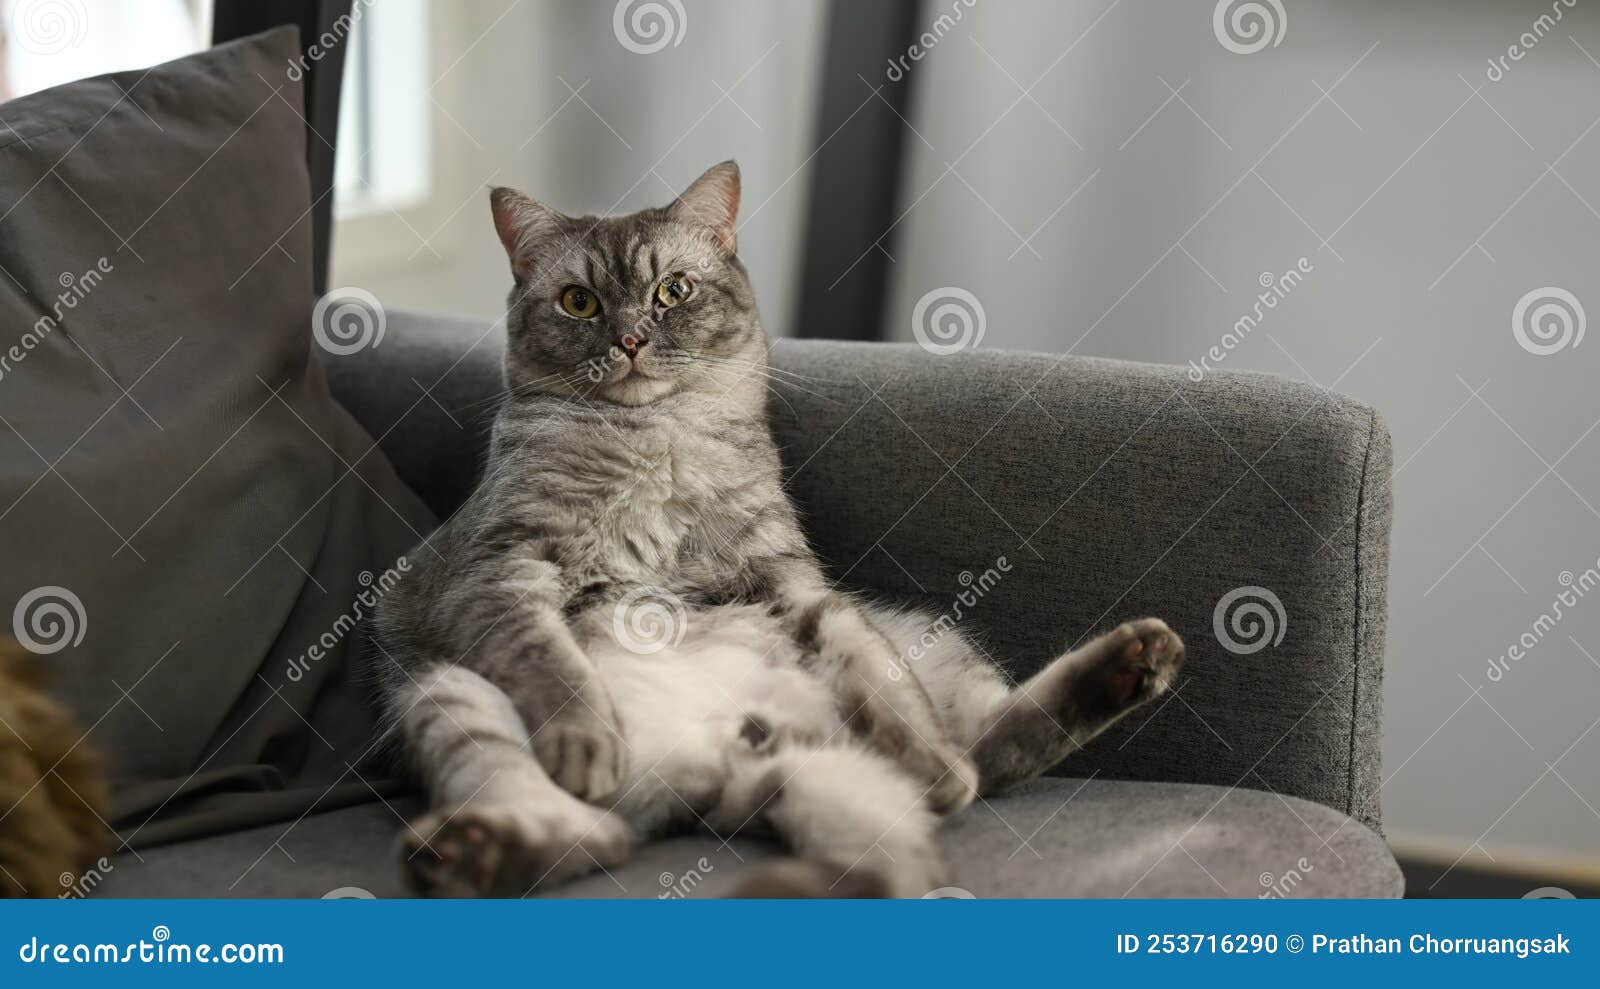 A Lazy Fat Cat Sitting With A Funny Gesture On The Comfortable Couch